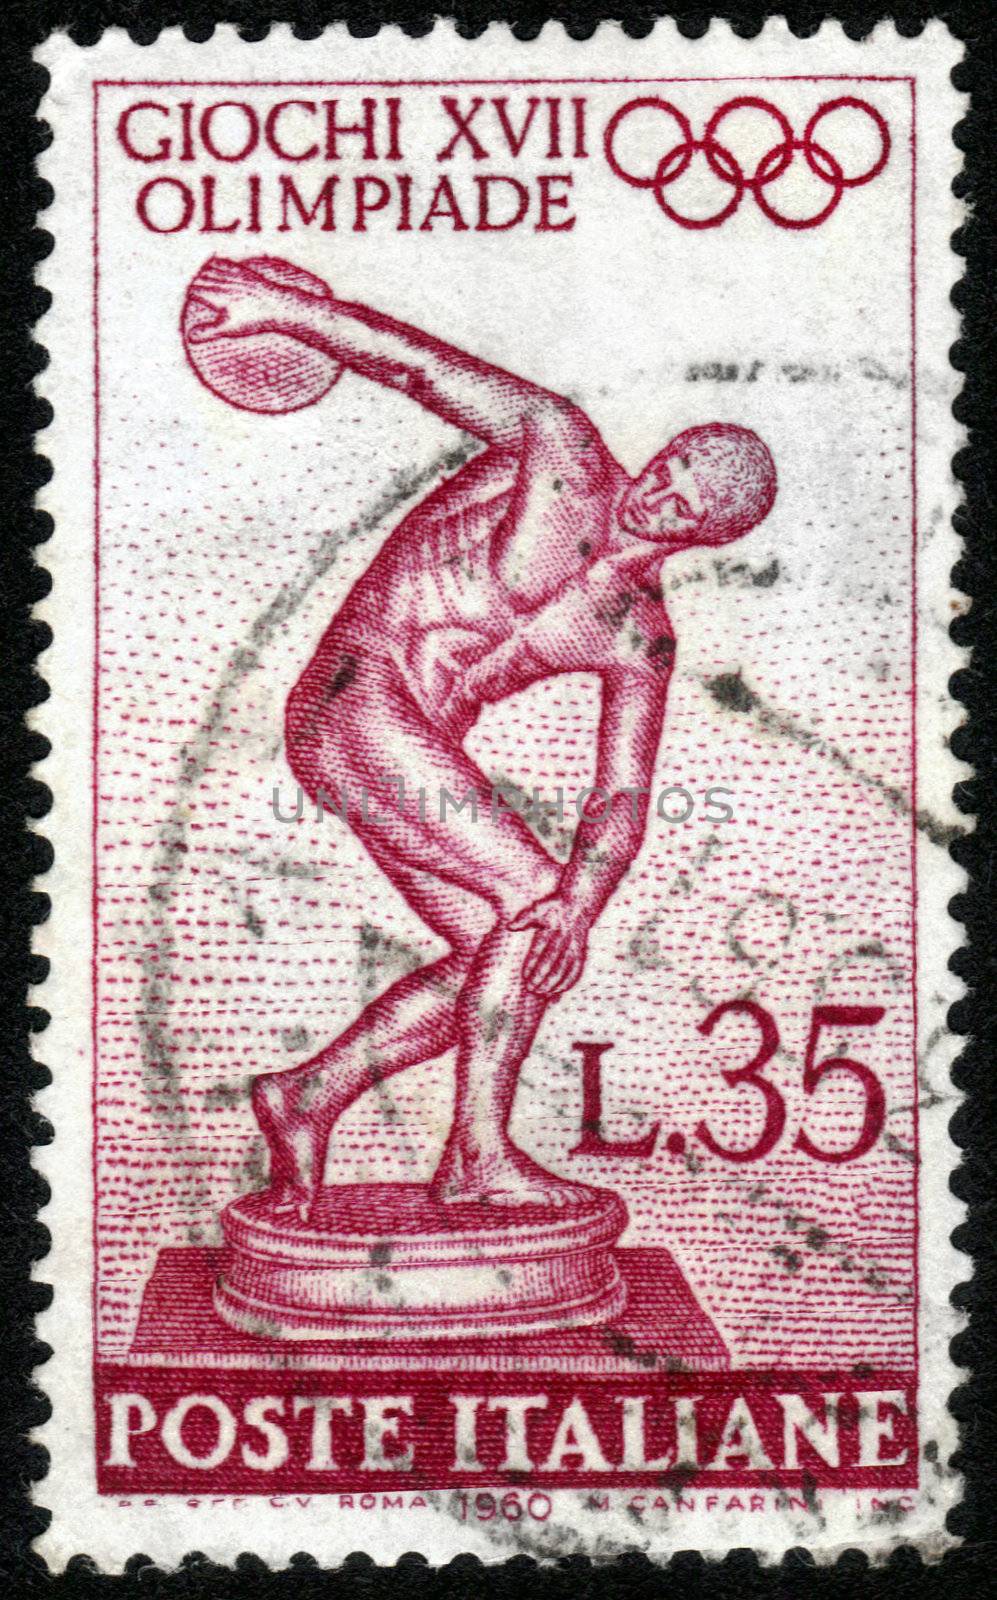 ITALY - CIRCA 1960: A stamp printed in Italy, shows image of Myron's Discobolus , devoted to 17th Olympic Games, Rome, Italy , circa 1960